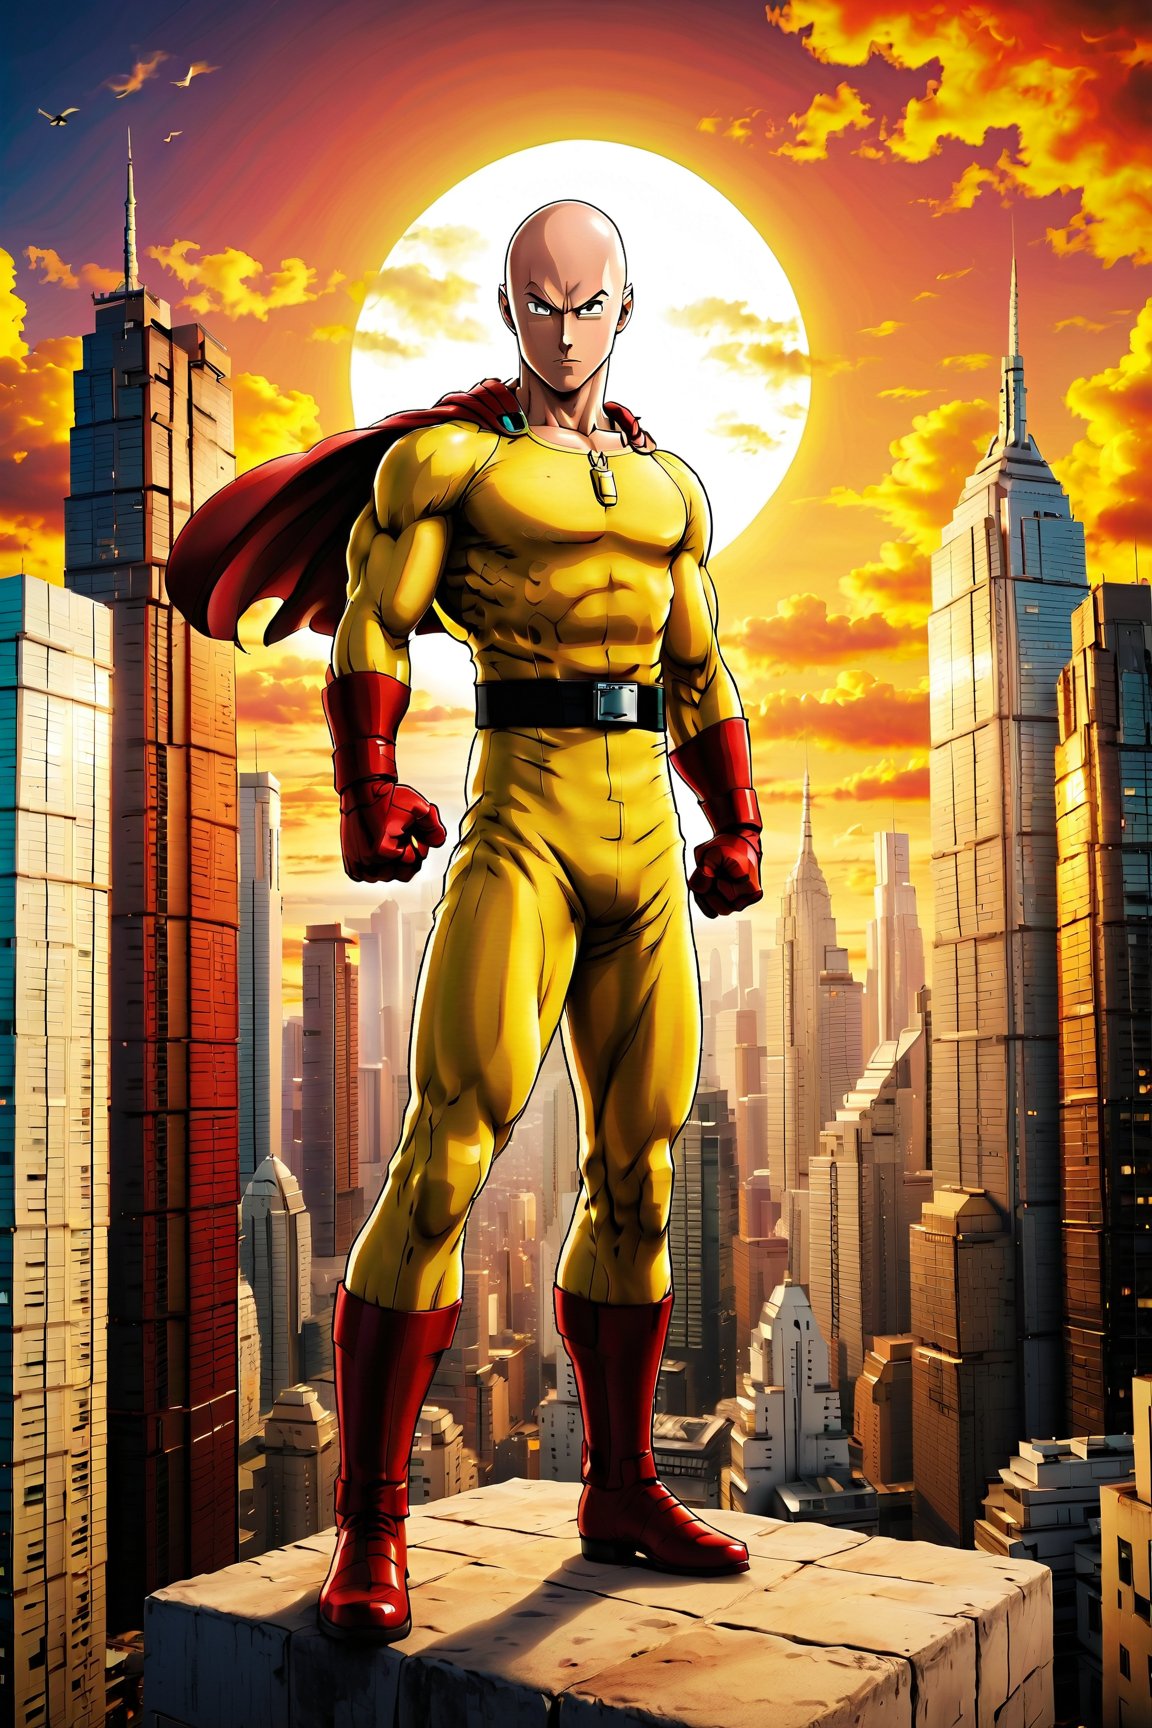 Create an image of Saitama from One punch man anime series posing to punch with all his strength with a background of skyscrapers for a poster of 12” by 16” size

